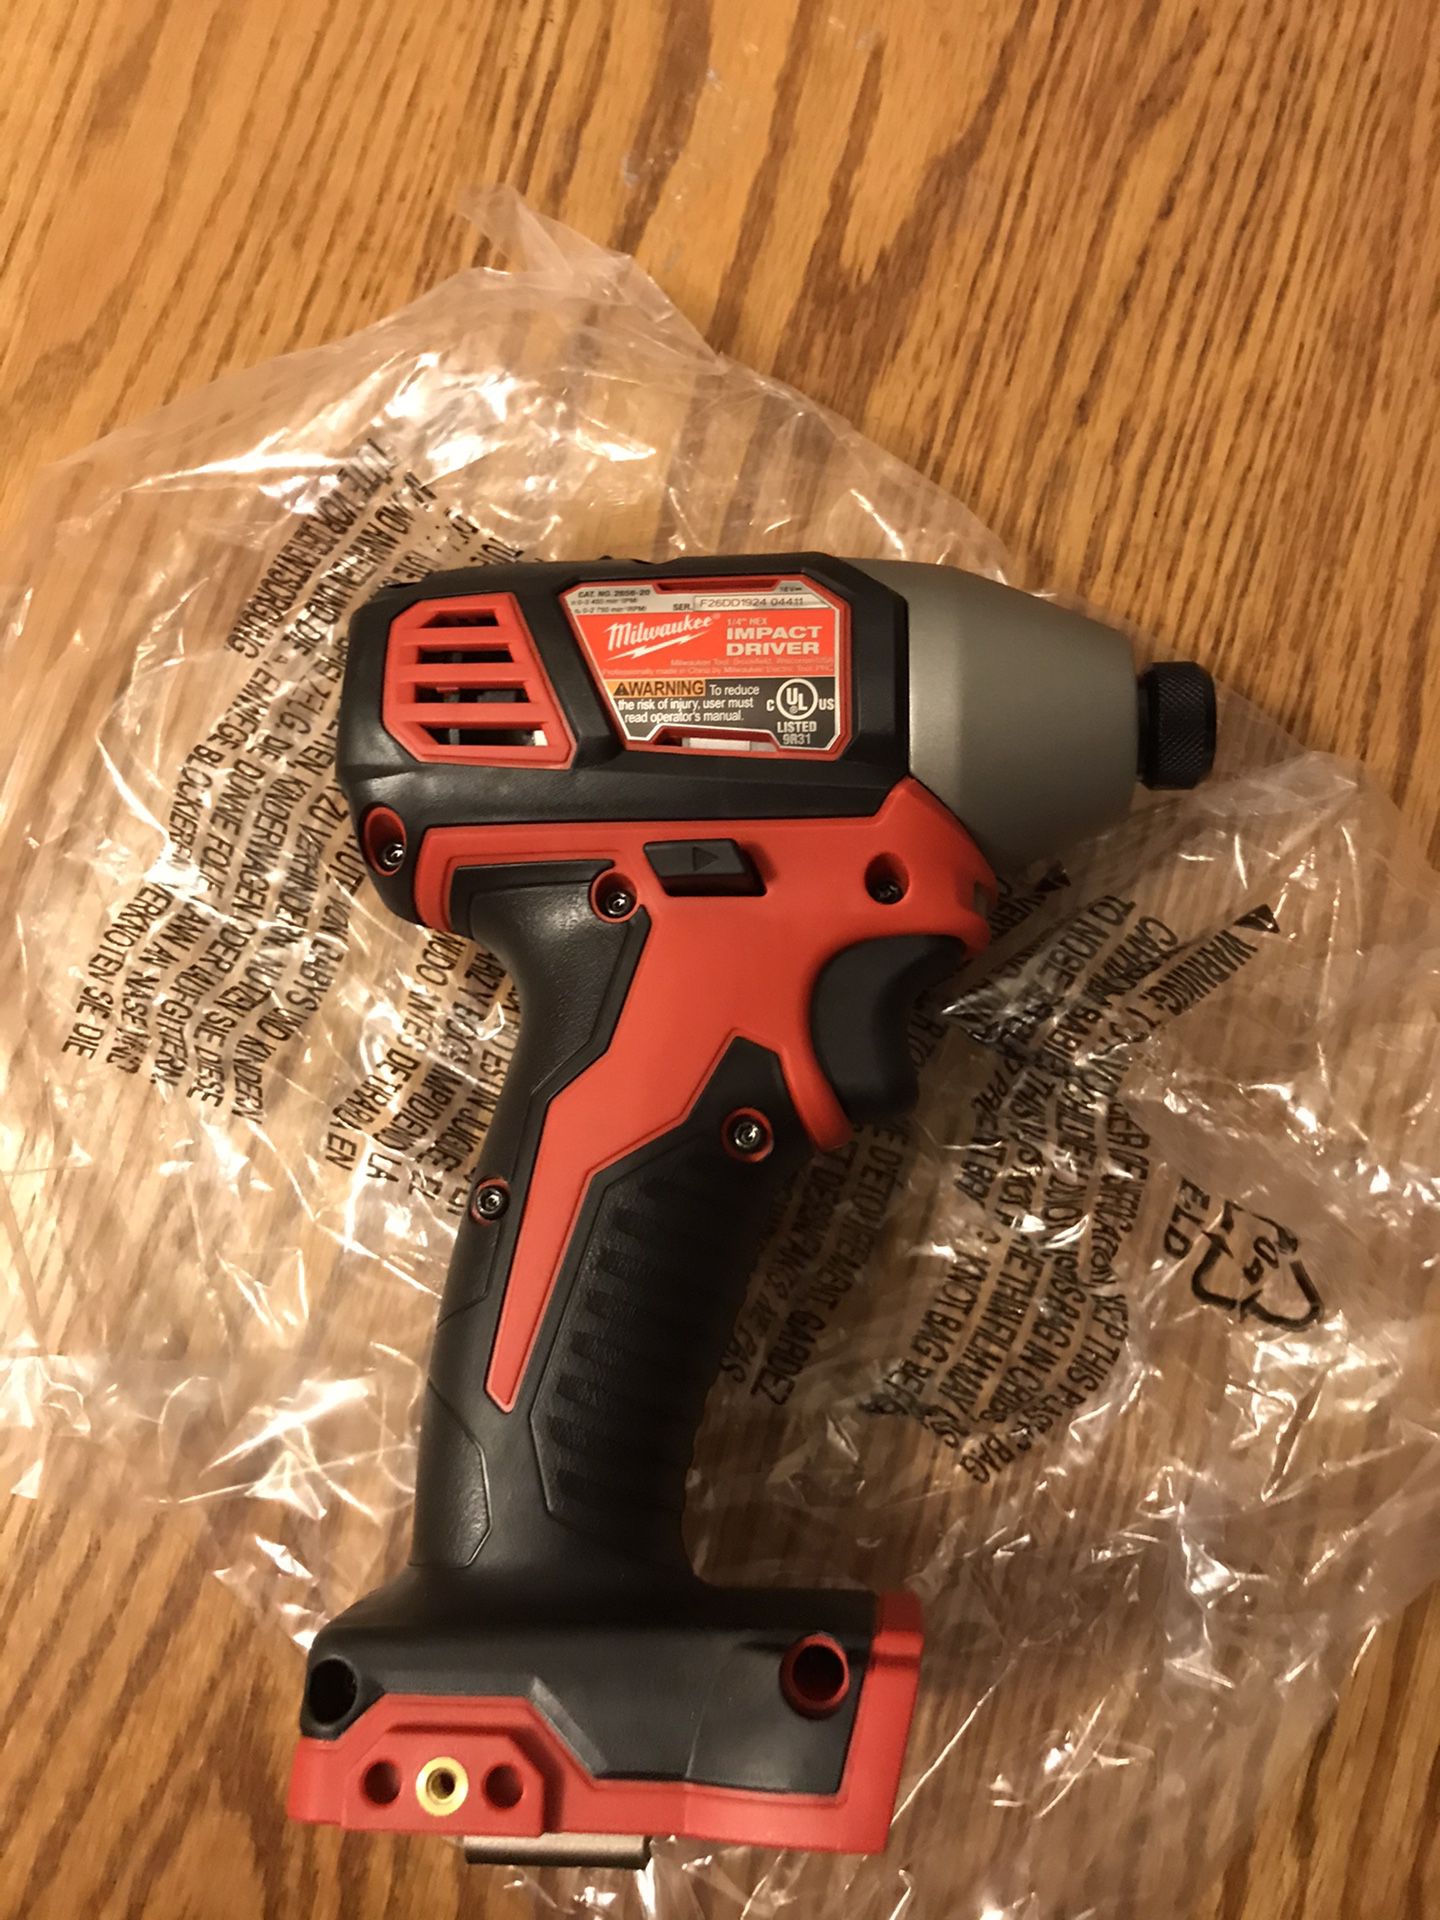 Brand new Milwaukee M18 1/4 impact. Tool only. Check out my other items I have for sale. Pick up in Lombard